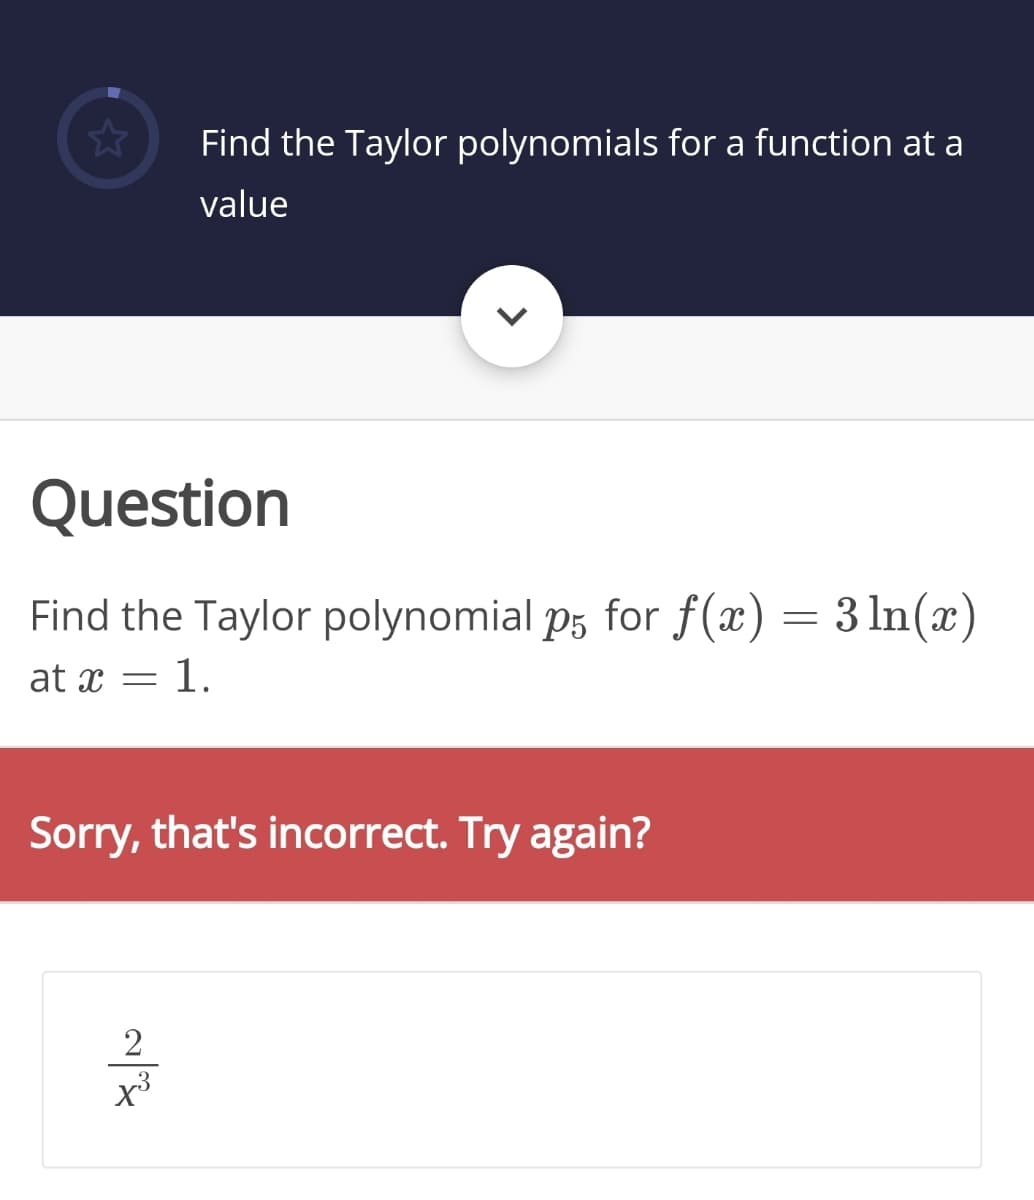 Find the Taylor polynomials for a function at a
value
Question
Find the Taylor polynomial p5 for f(x) = 3 ln(x)
at x = 1.
Sorry, that's incorrect. Try again?
